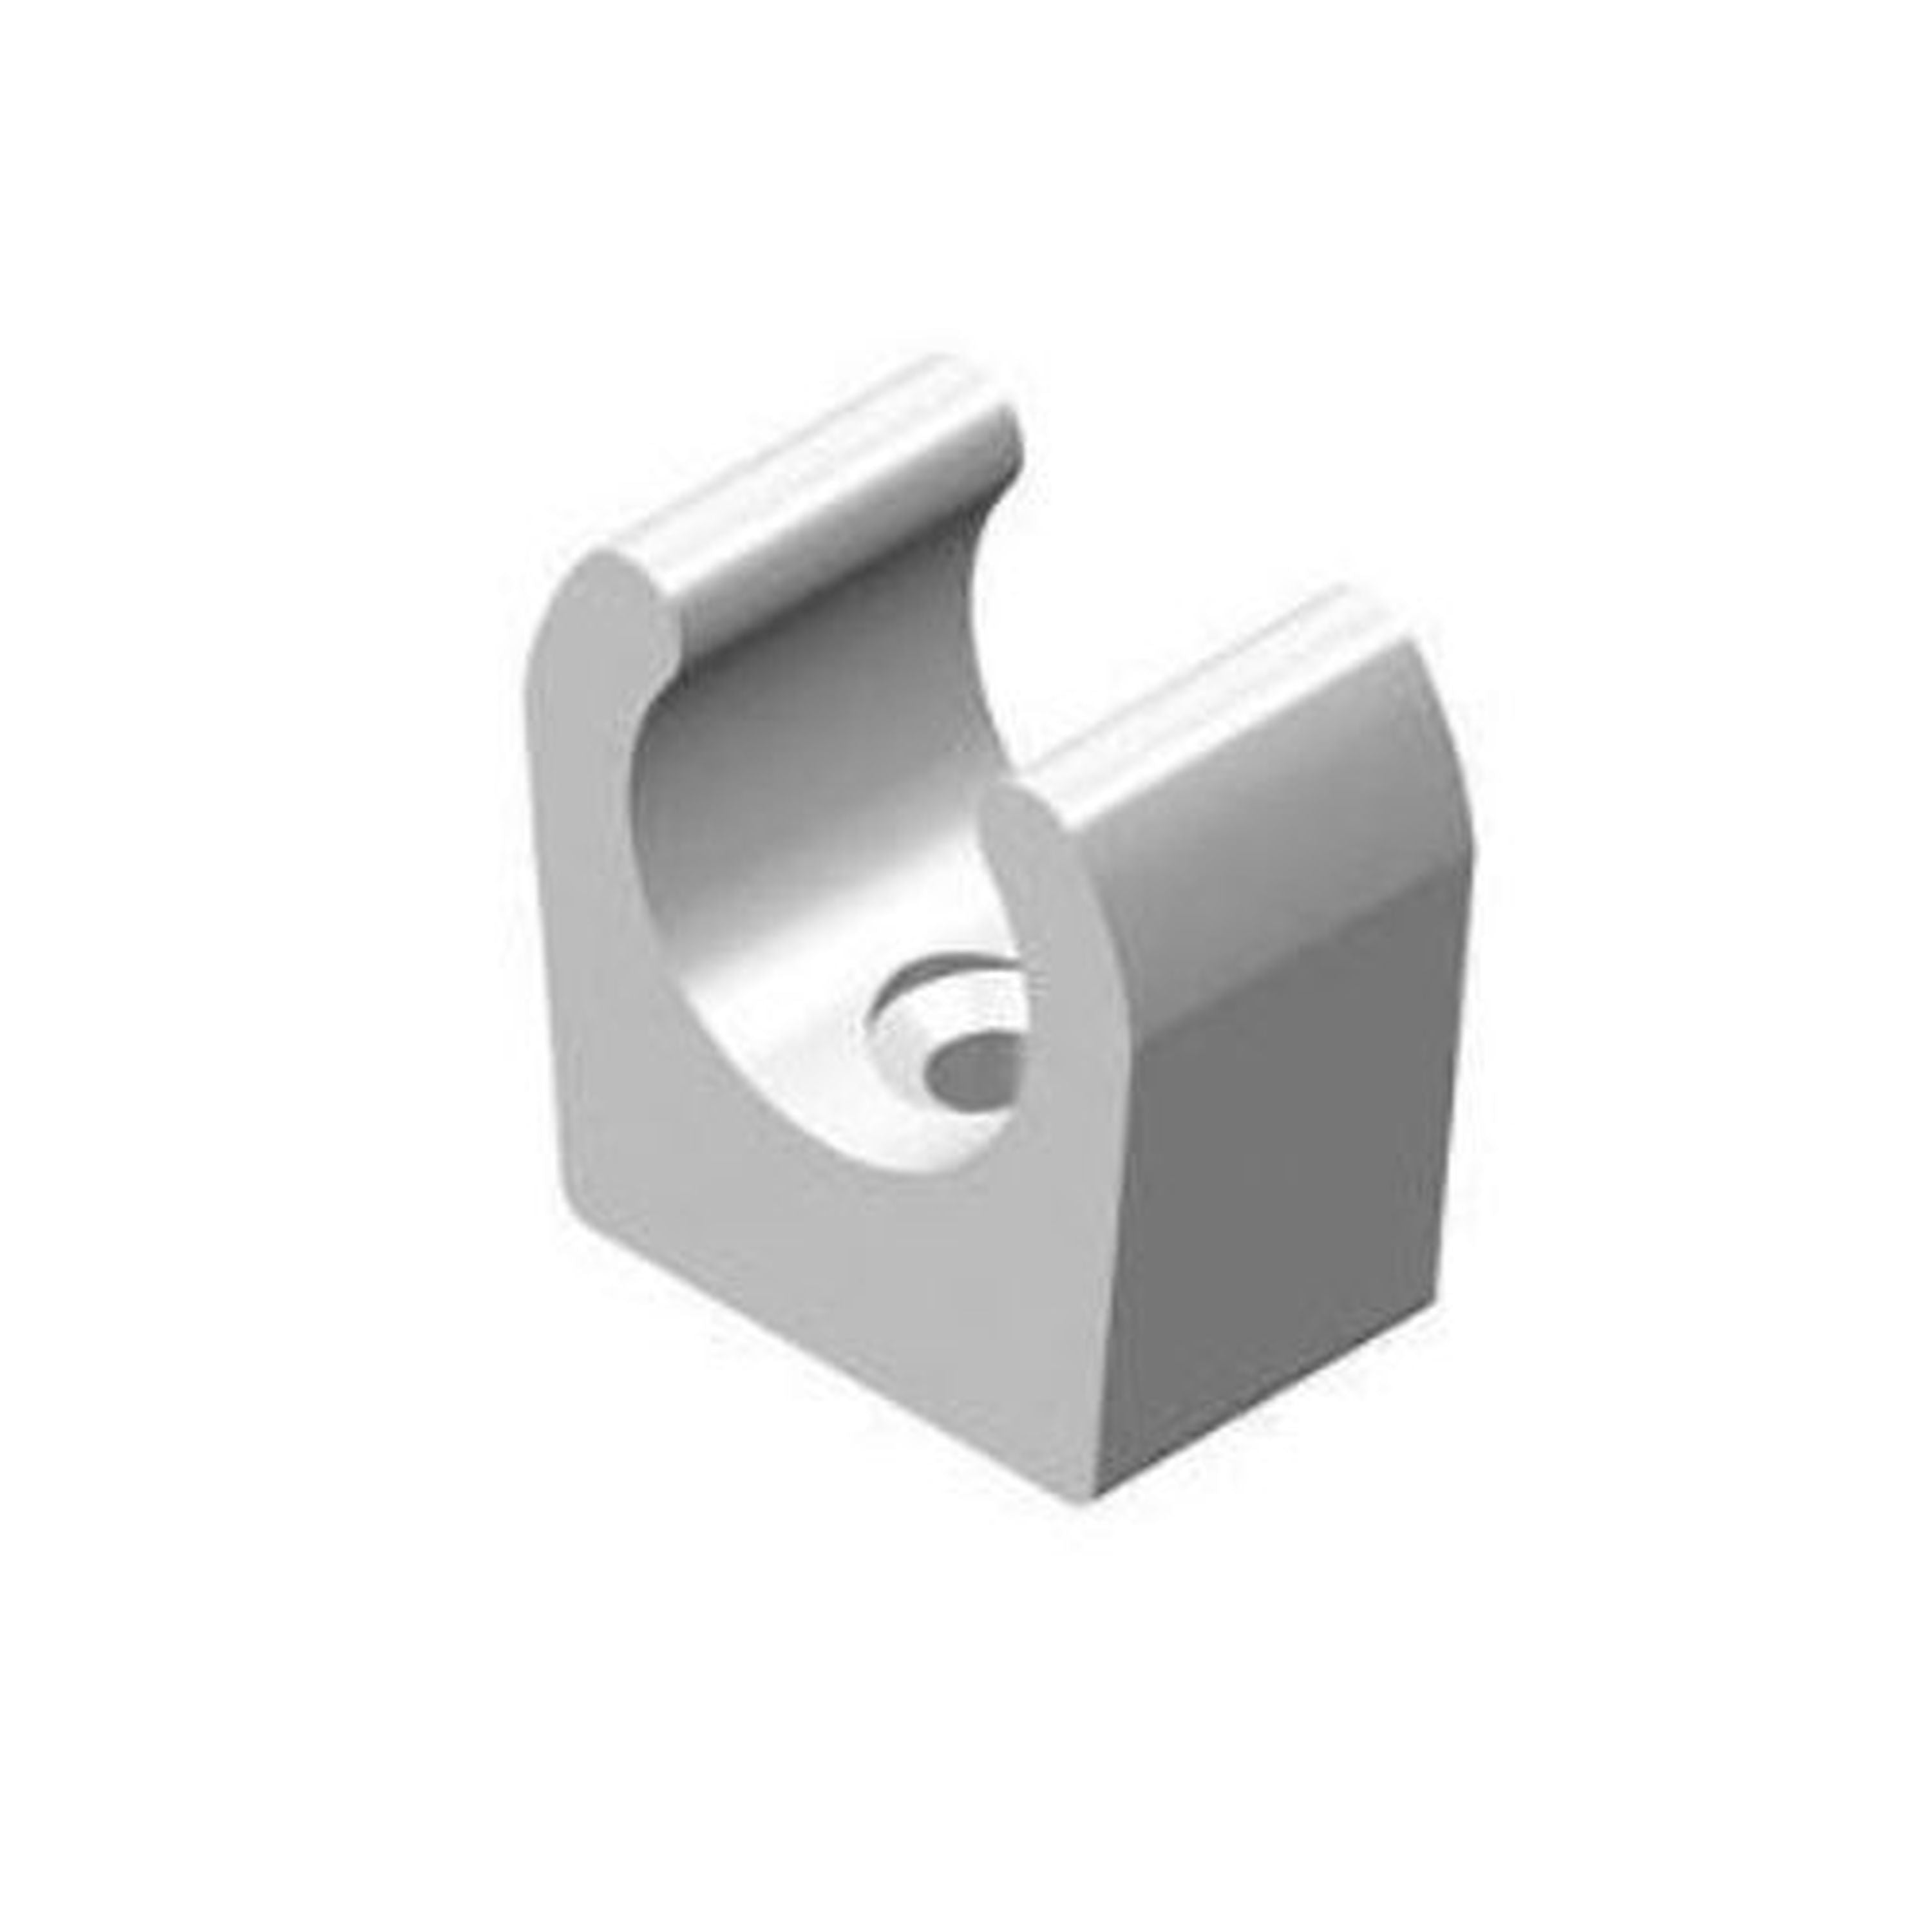 Whale mounting clip 15mm, white